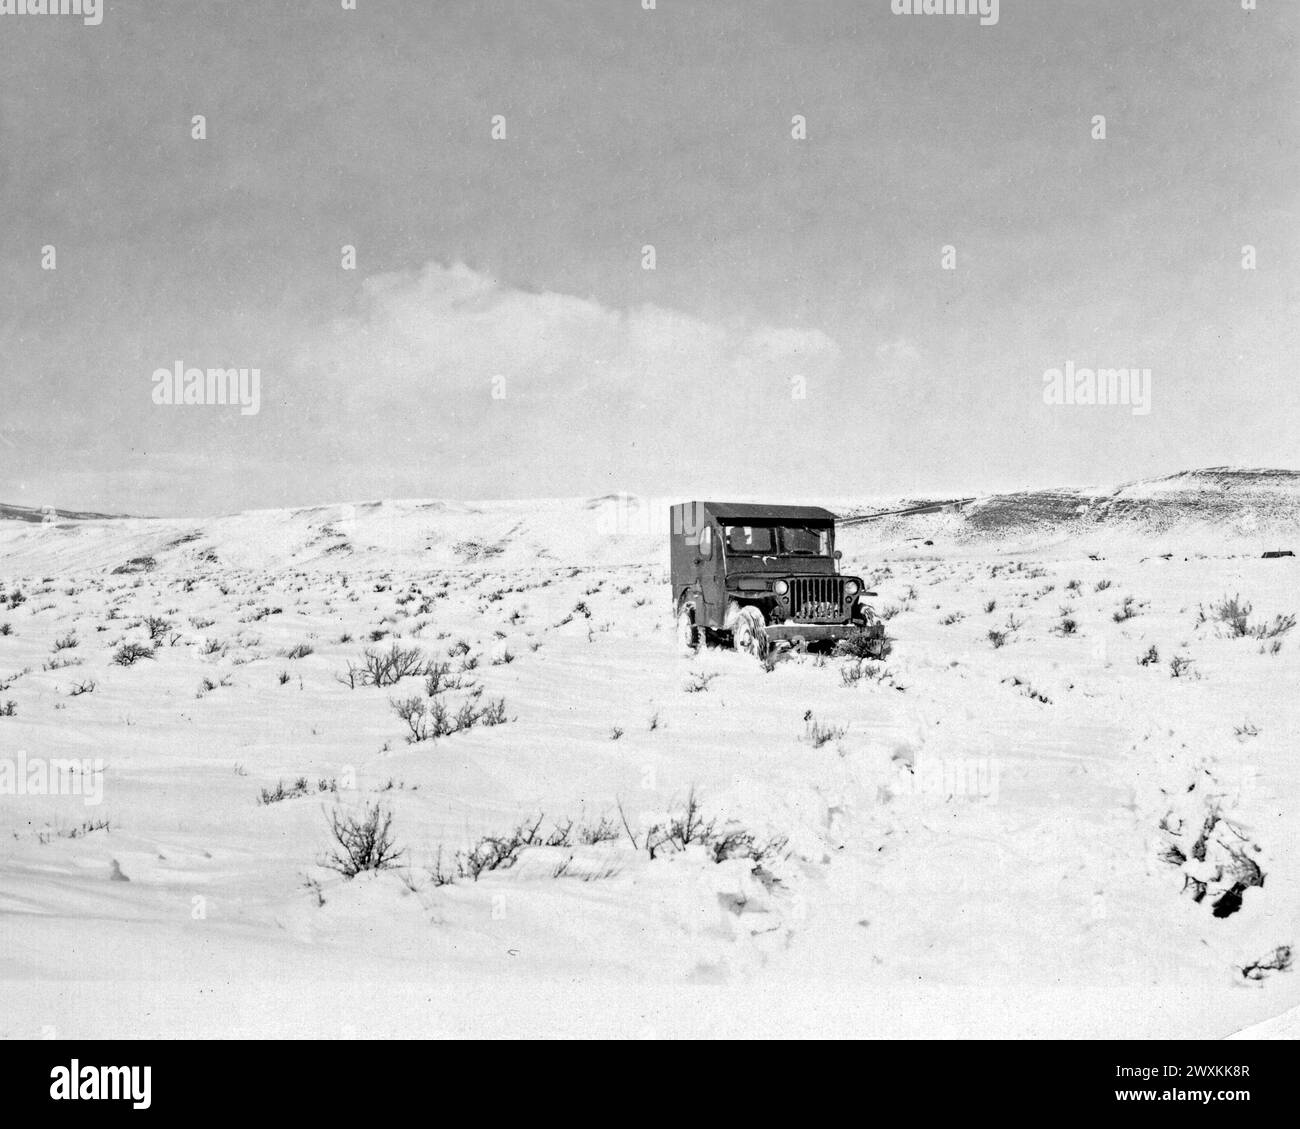 A jeep drives across a snowy field in rural Wyoming ca. 1930s or 1940s Stock Photo